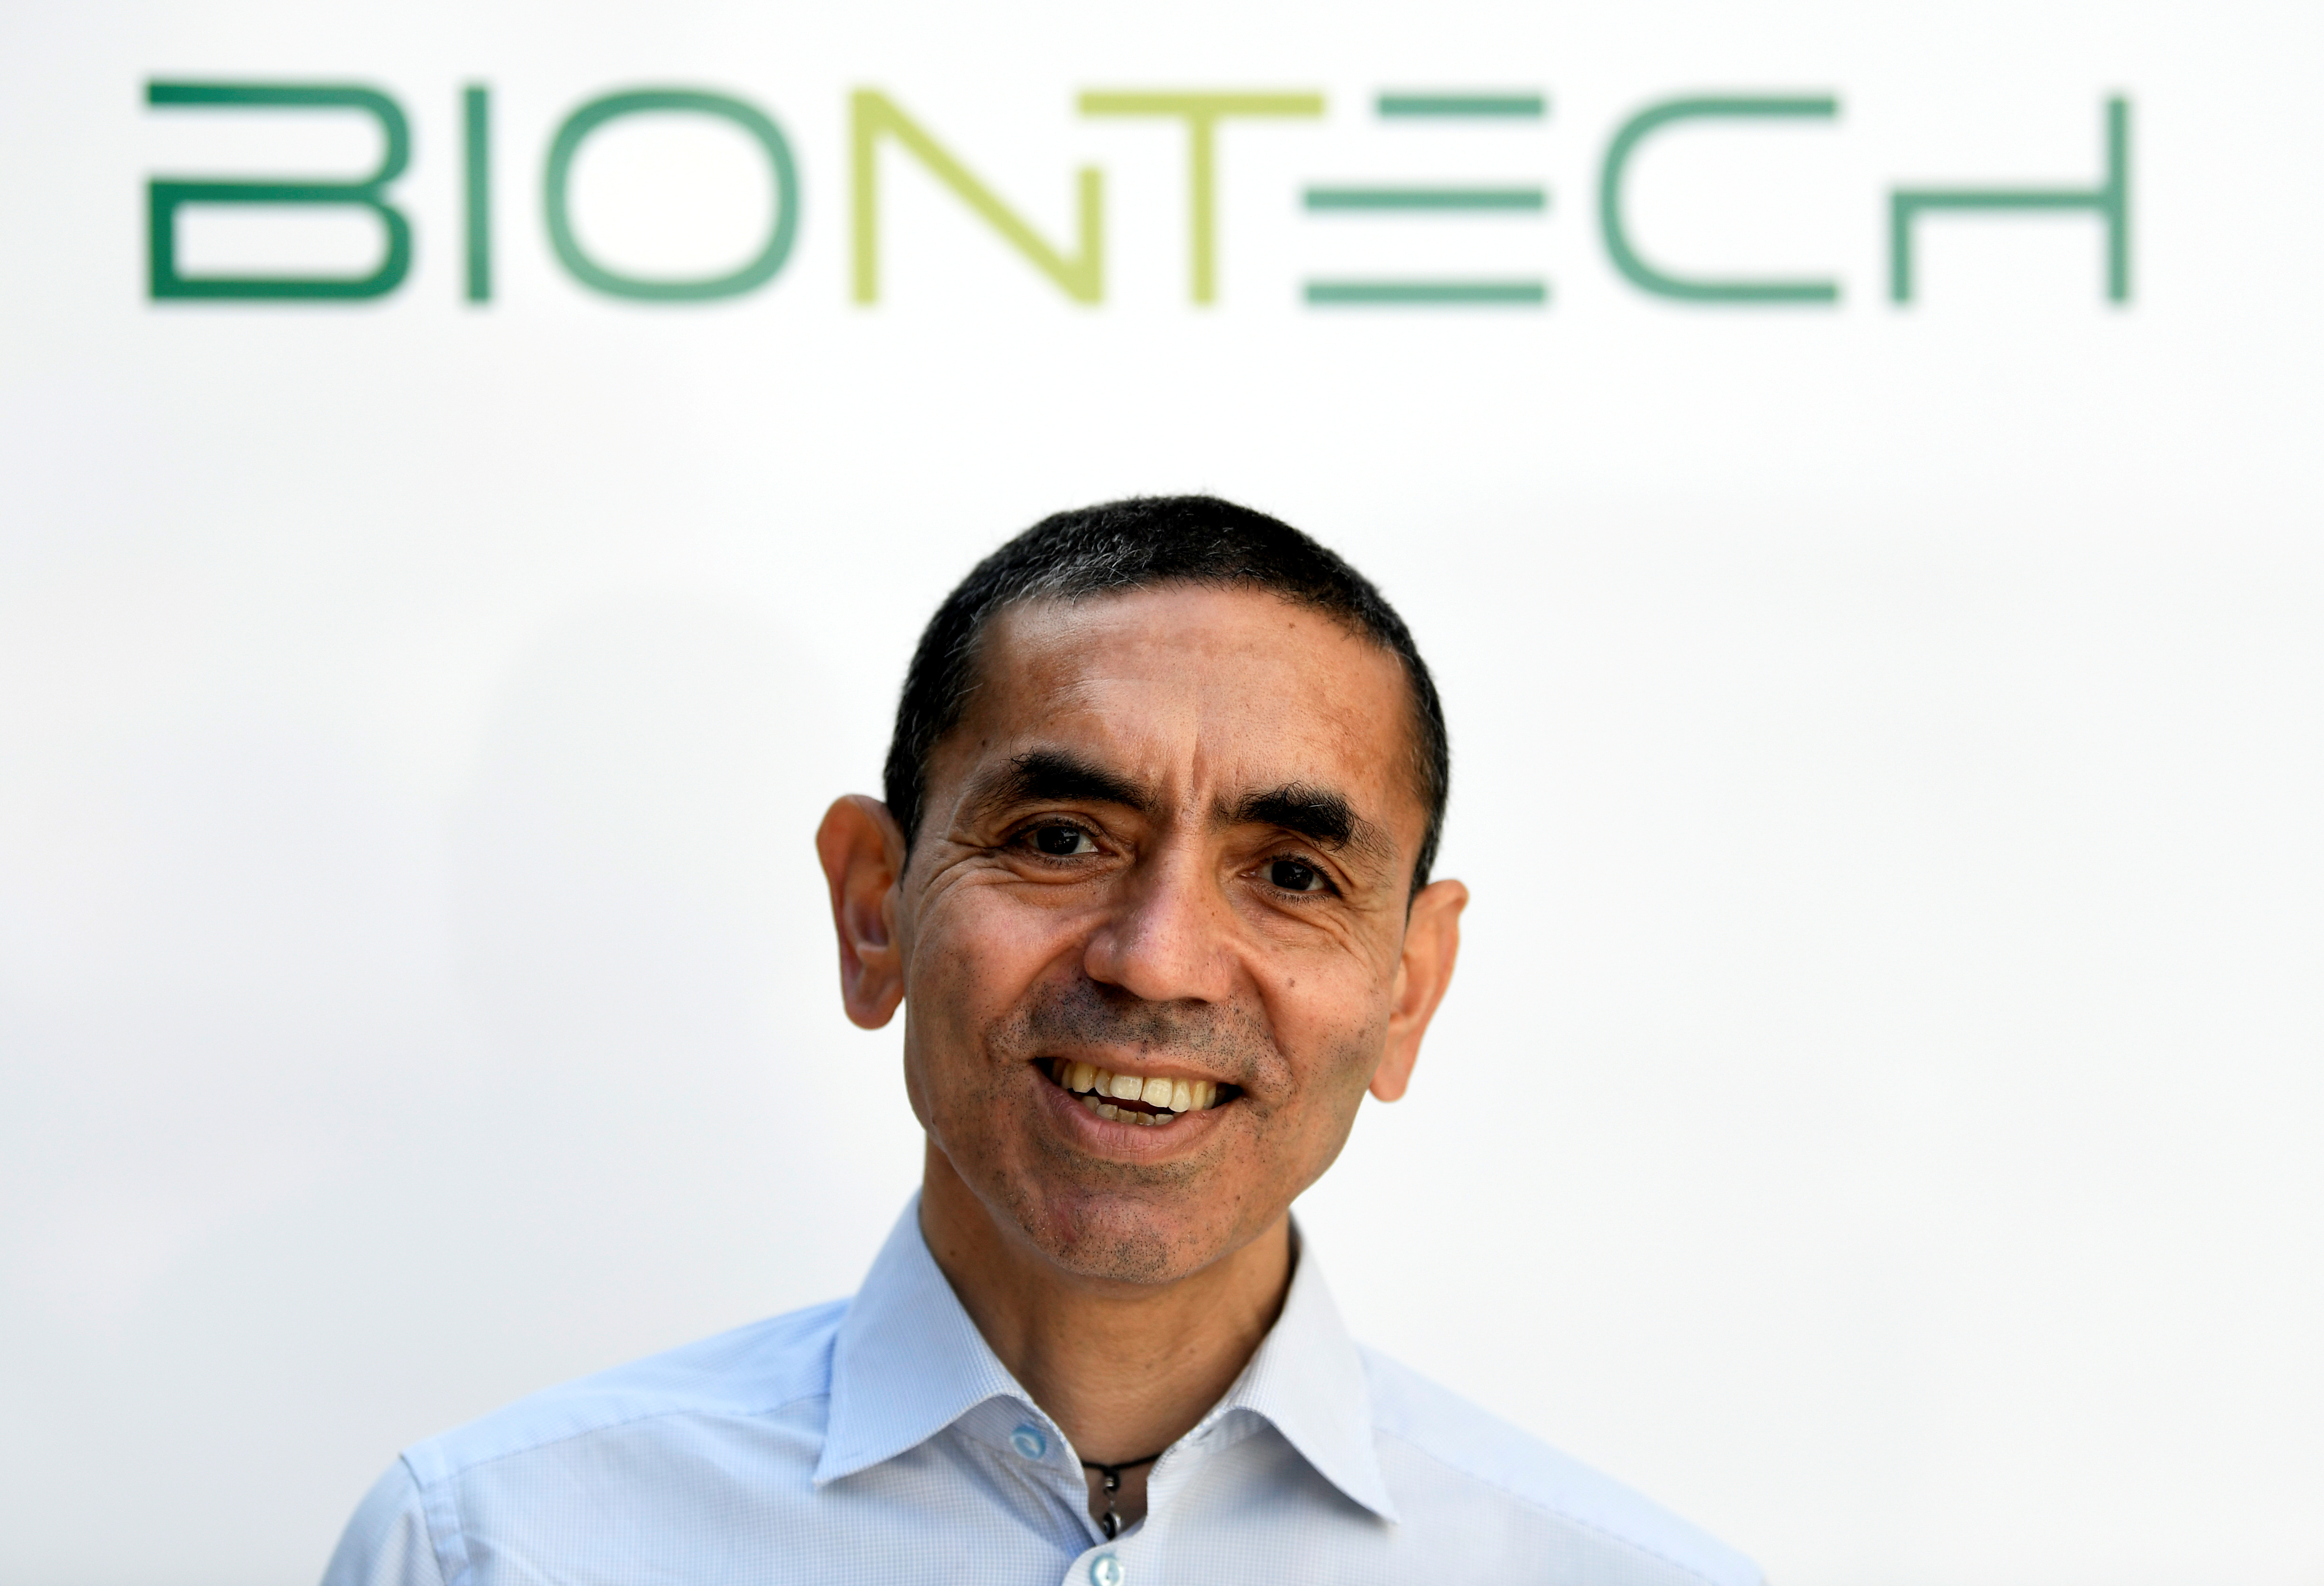 Ugur Sahin, CEO and co-founder of German biotech firm BioNTech, is interviewed by journalists in Marburg, Germany September 17, 2020. REUTERS/Fabian Bimmer/File Photo